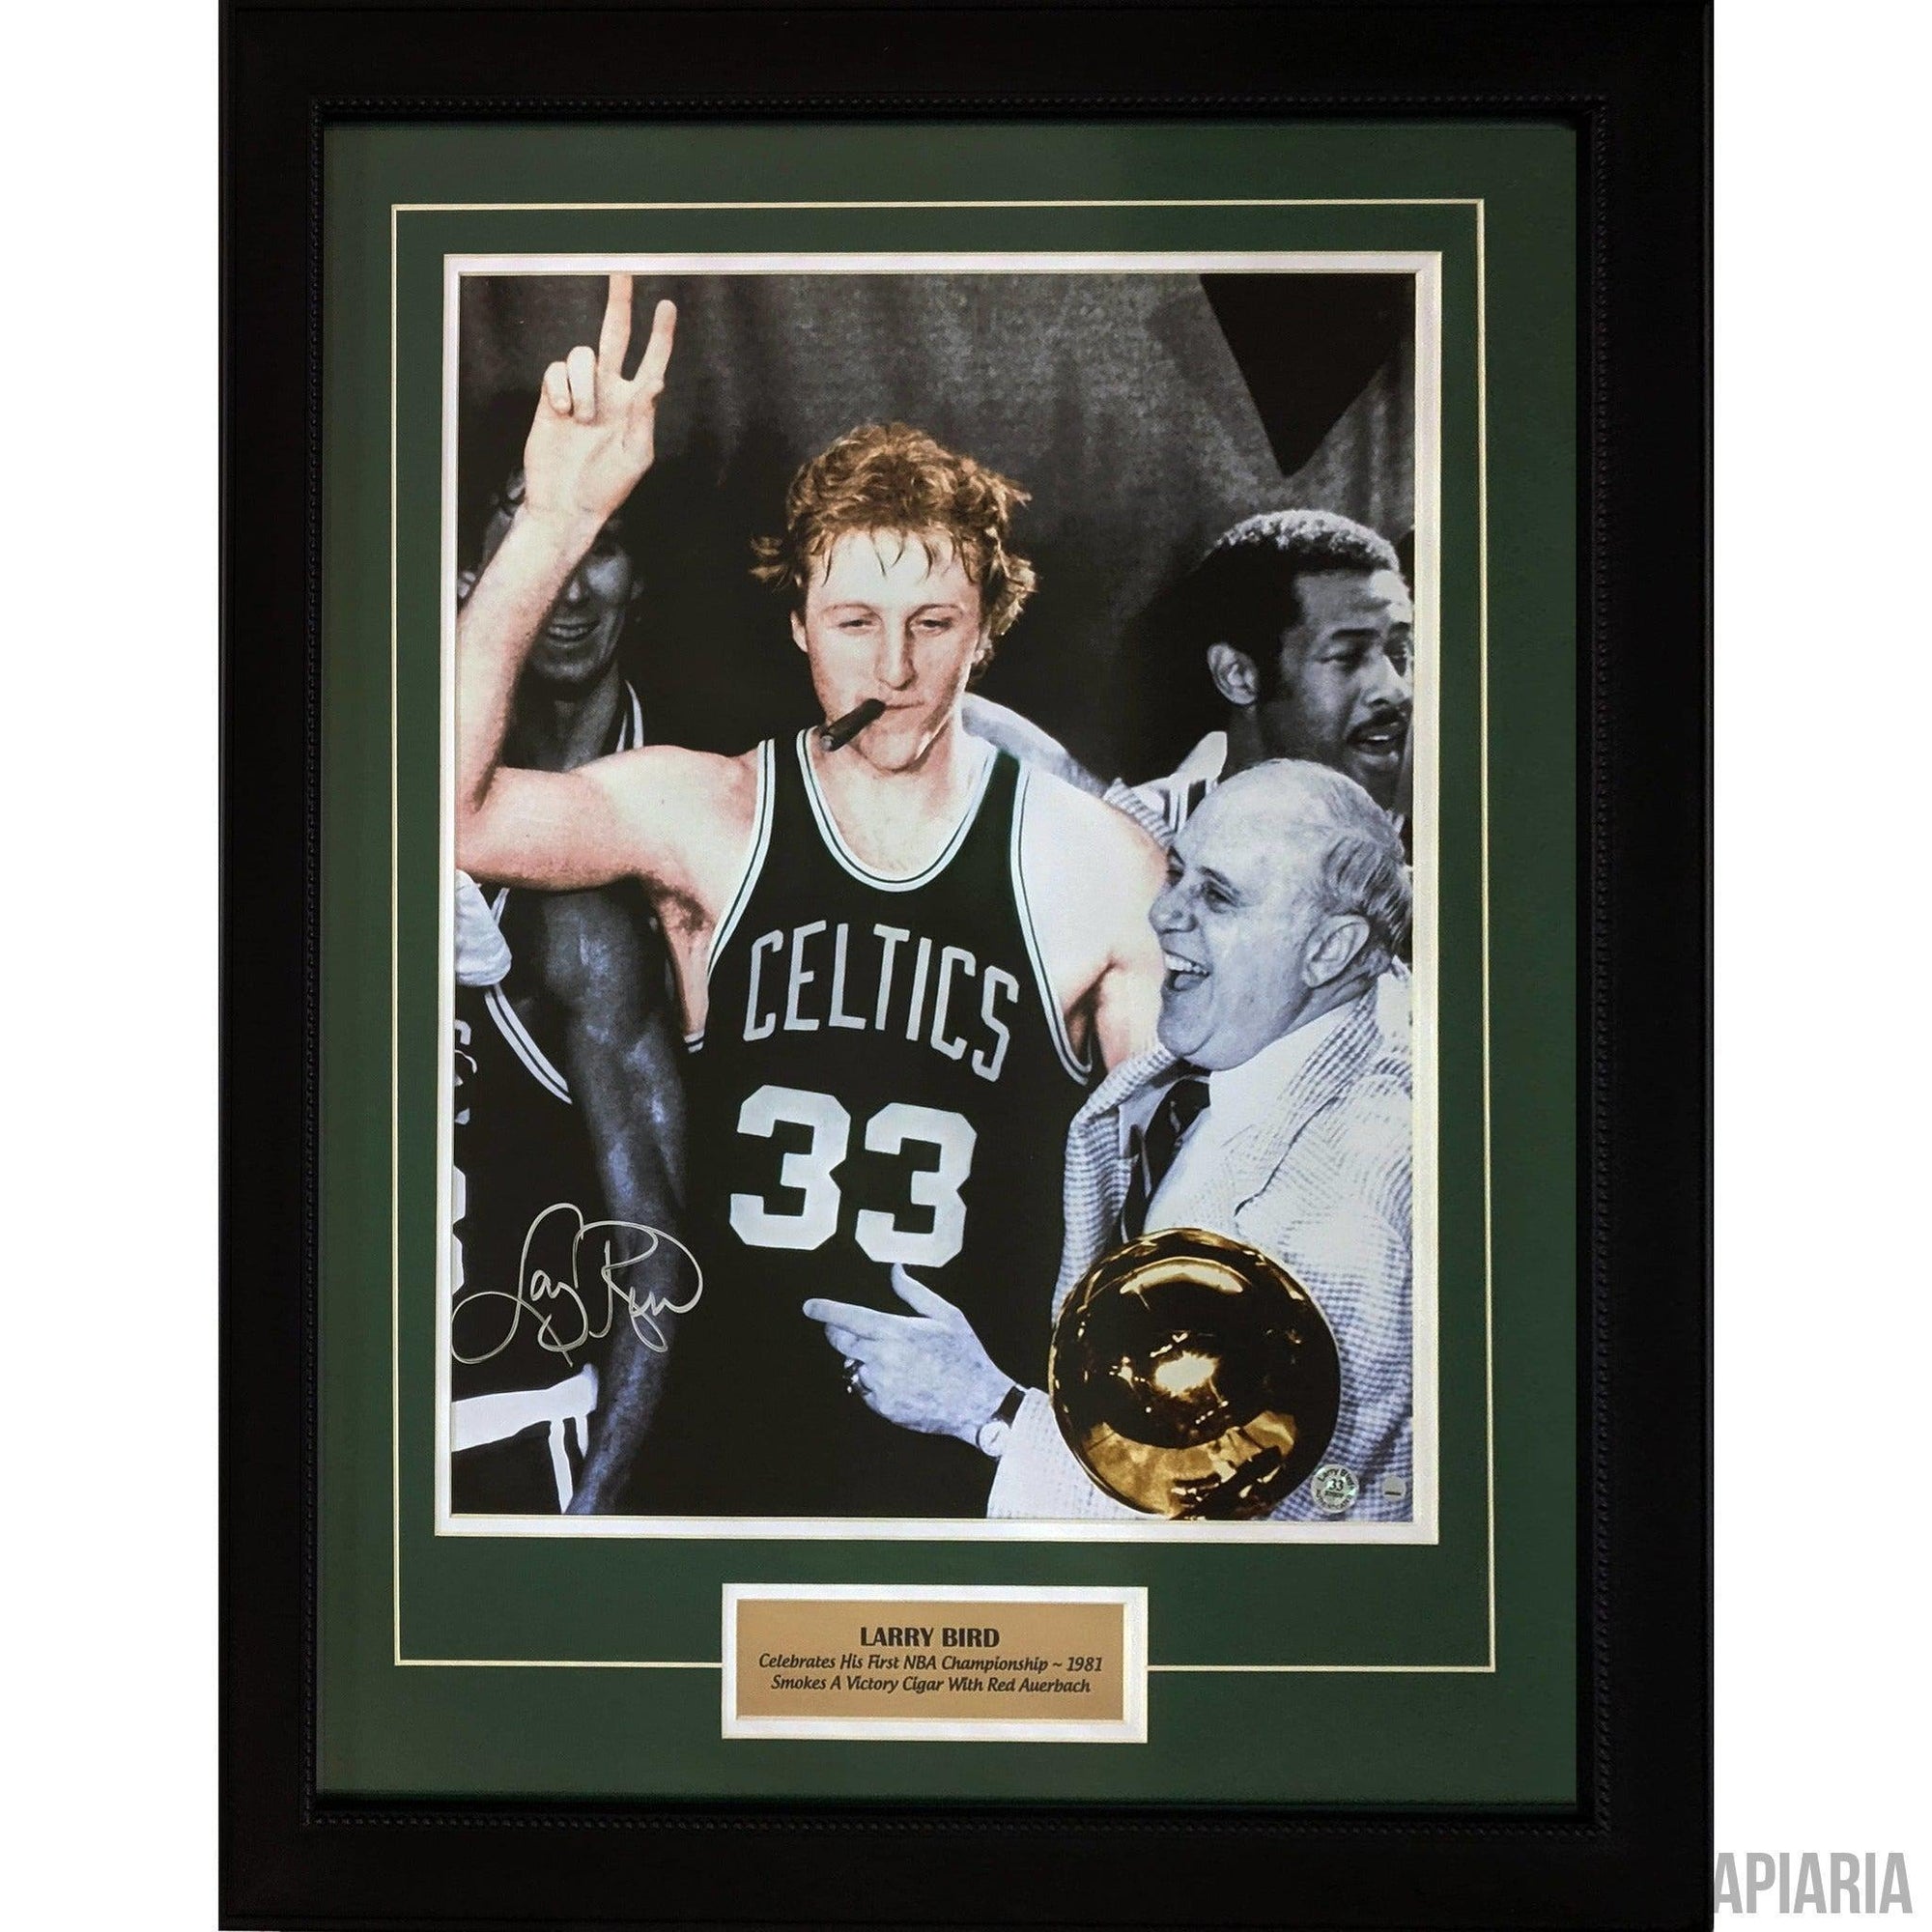 Larry Bird Autographed Photo, Smoking Cigar With Red Auerbach After Winning First NBA Championship-Framed Item-Apiaria